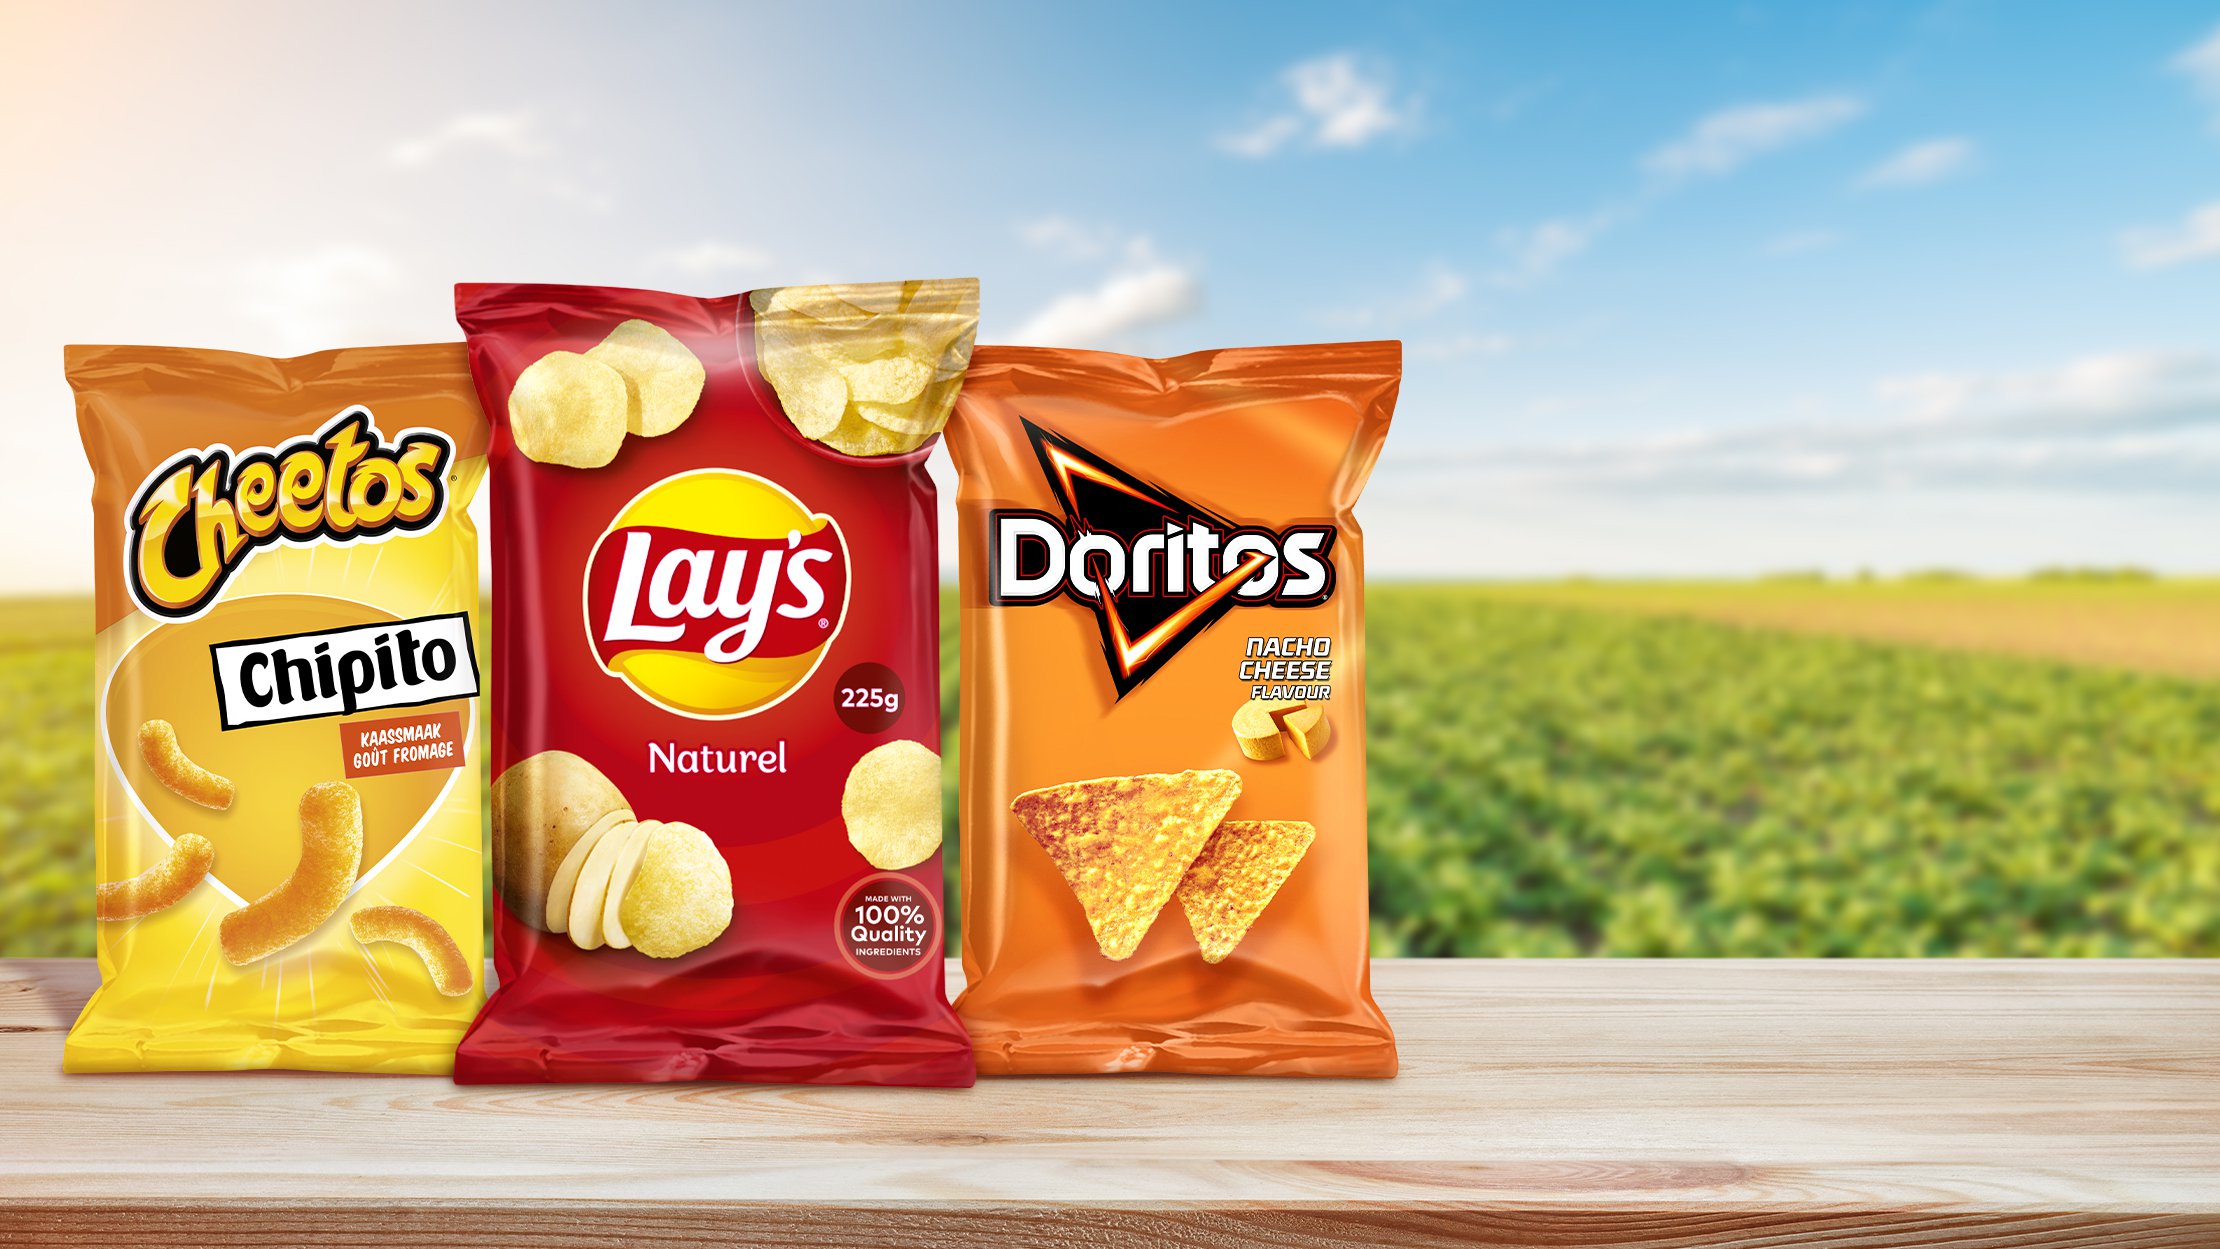 Cheetos, Lay's, and Doritos bags sitting in front of a farming field